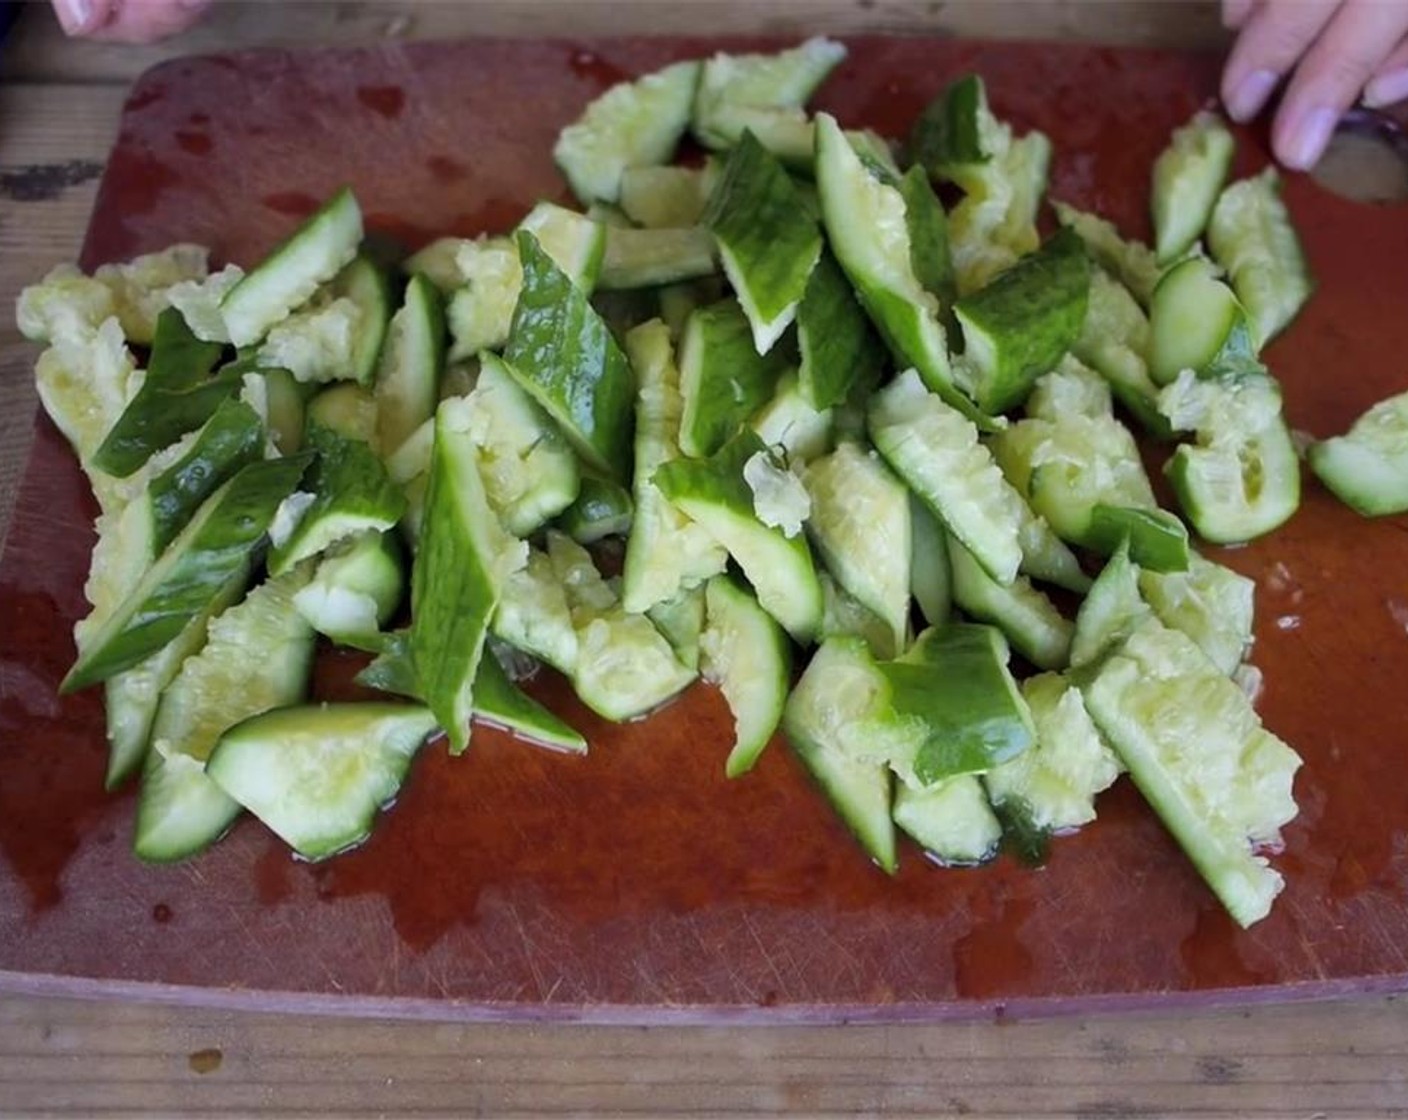 step 2 Cut the ends of the Small Cucumbers (5), then bash them with a pestle until they crumble apart. Place in a sieve over a bowl, sprinkle with Sea Salt (2 Tbsp) and then let sit in refrigerator for 15 minutes.